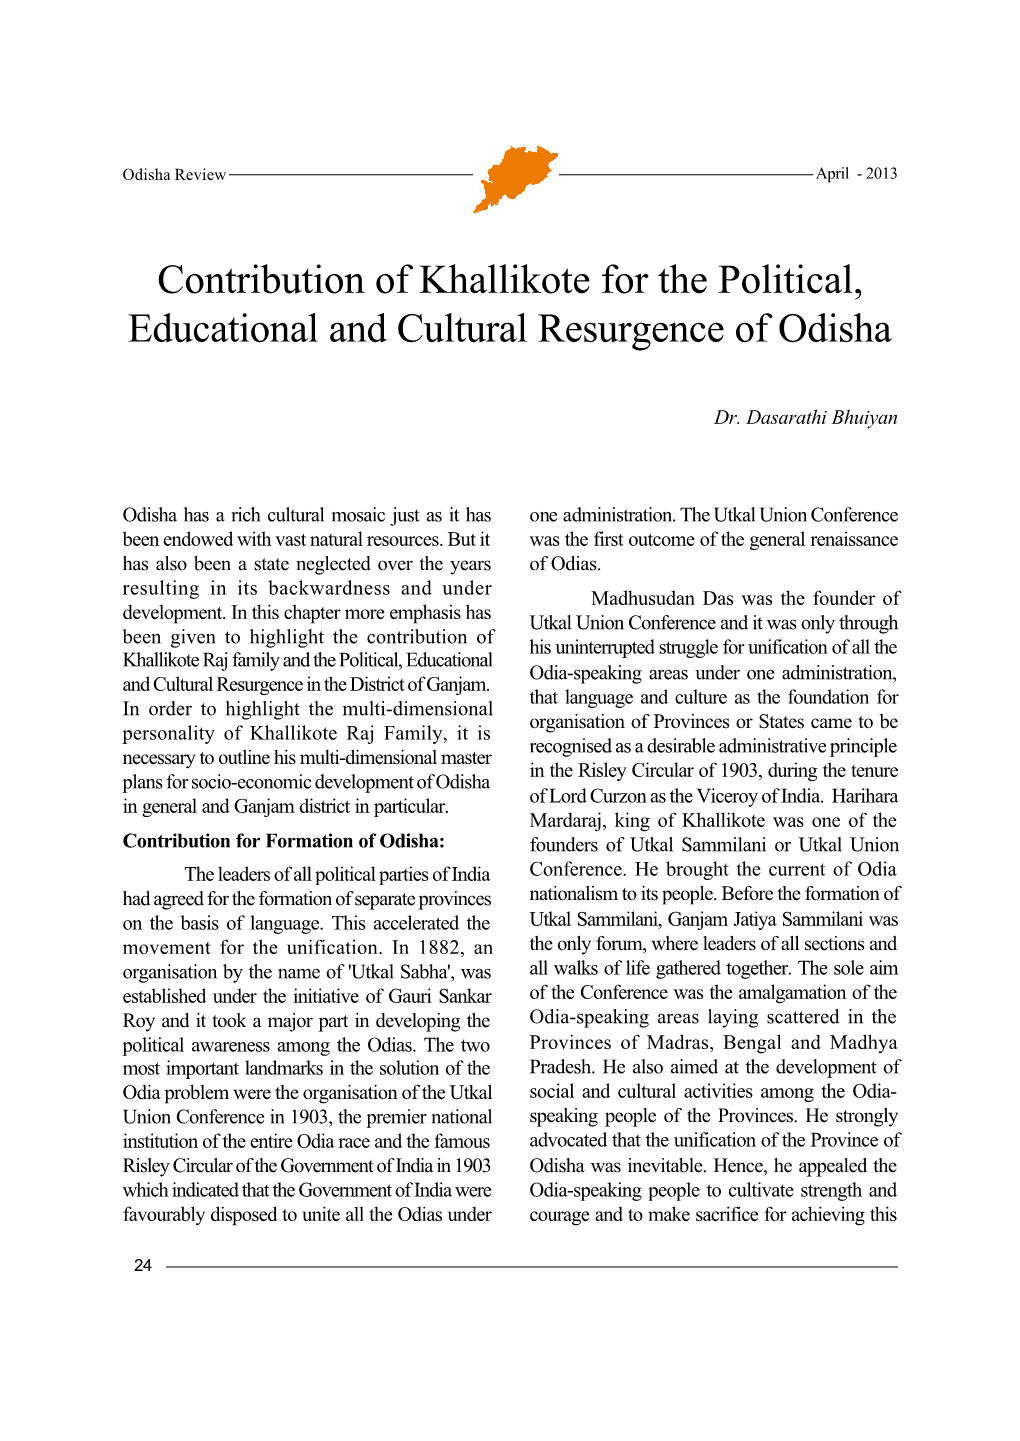 Contribution of Khallikote for the Political, Educational and Cultural Resurgence of Odisha